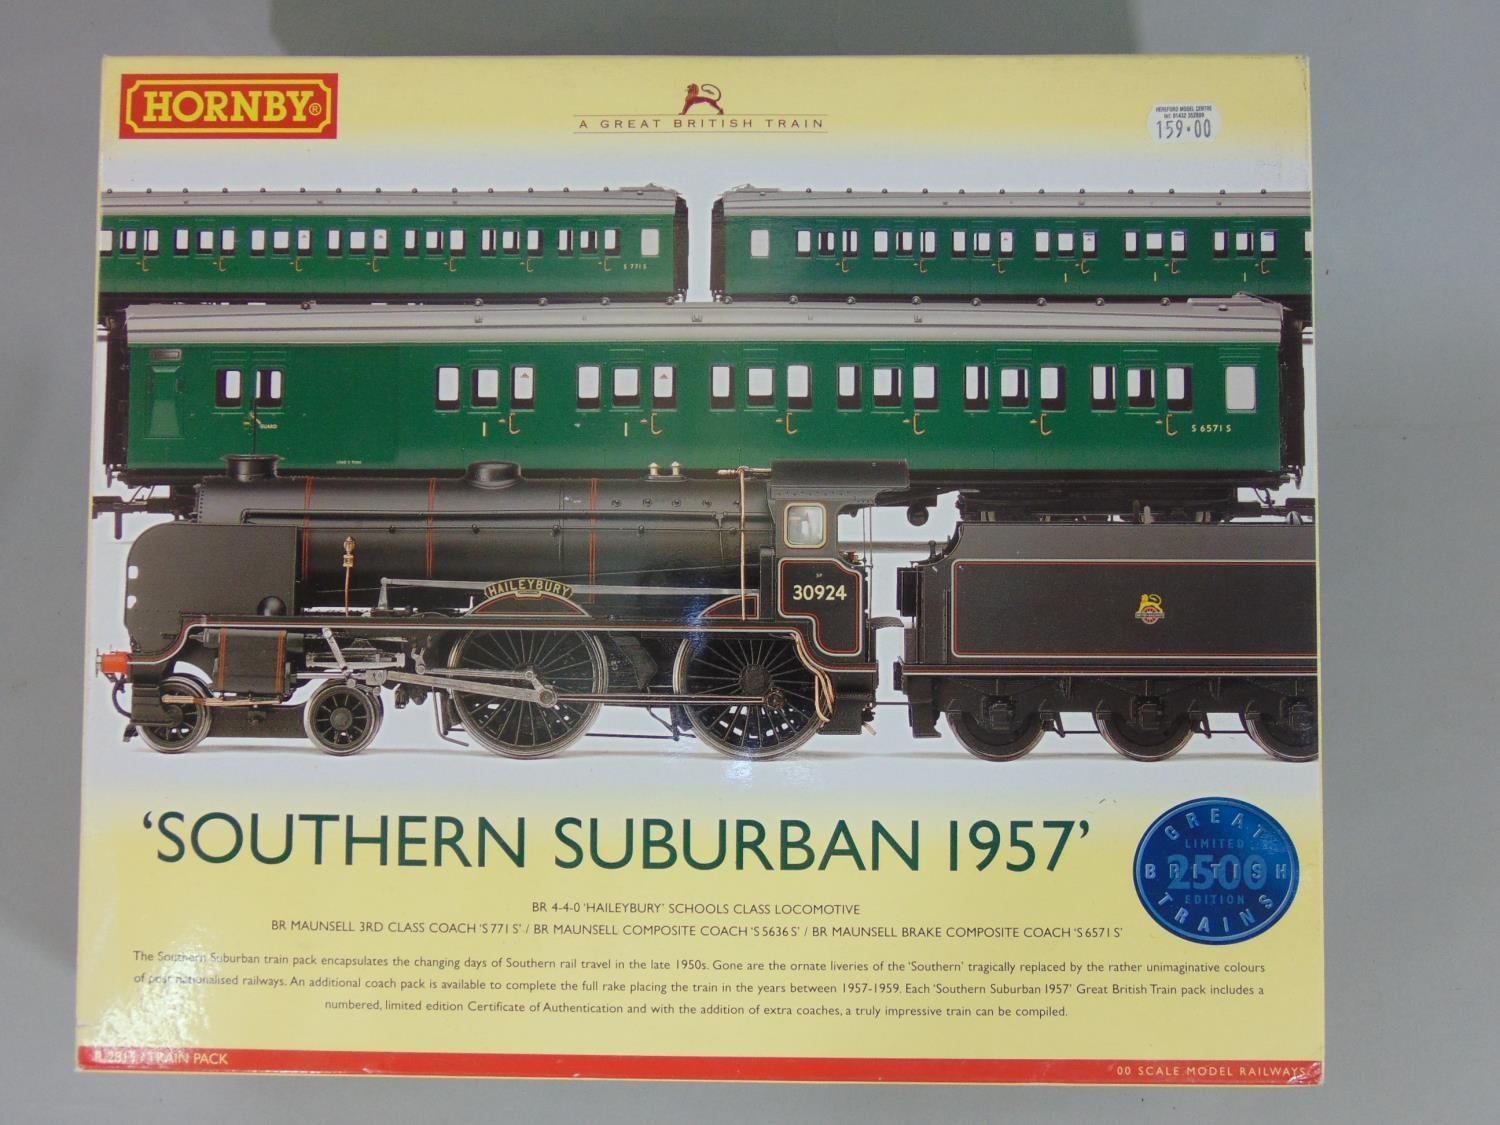 Hornby 'Southern Suburban 1957' R2815 Train Pack. with original box, packaging and certificate